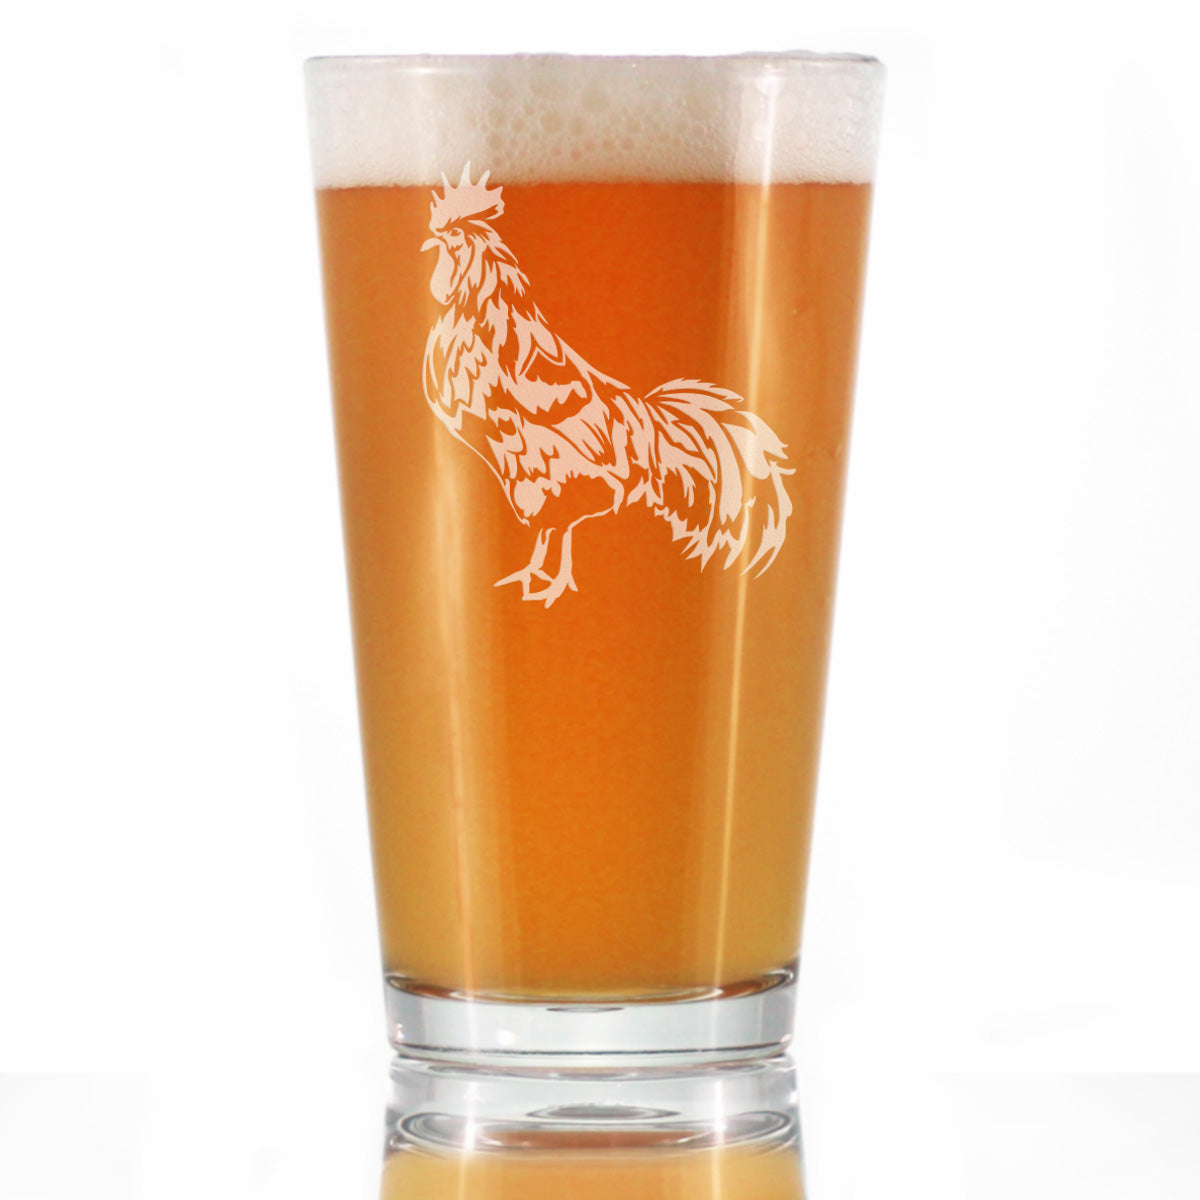 Rooster - Cute Funny Pint Glass, 16 Oz, Etched Sayings, Cute Farmhouse Décor Gifts for Lovers of Roosters, Chickens and Beer